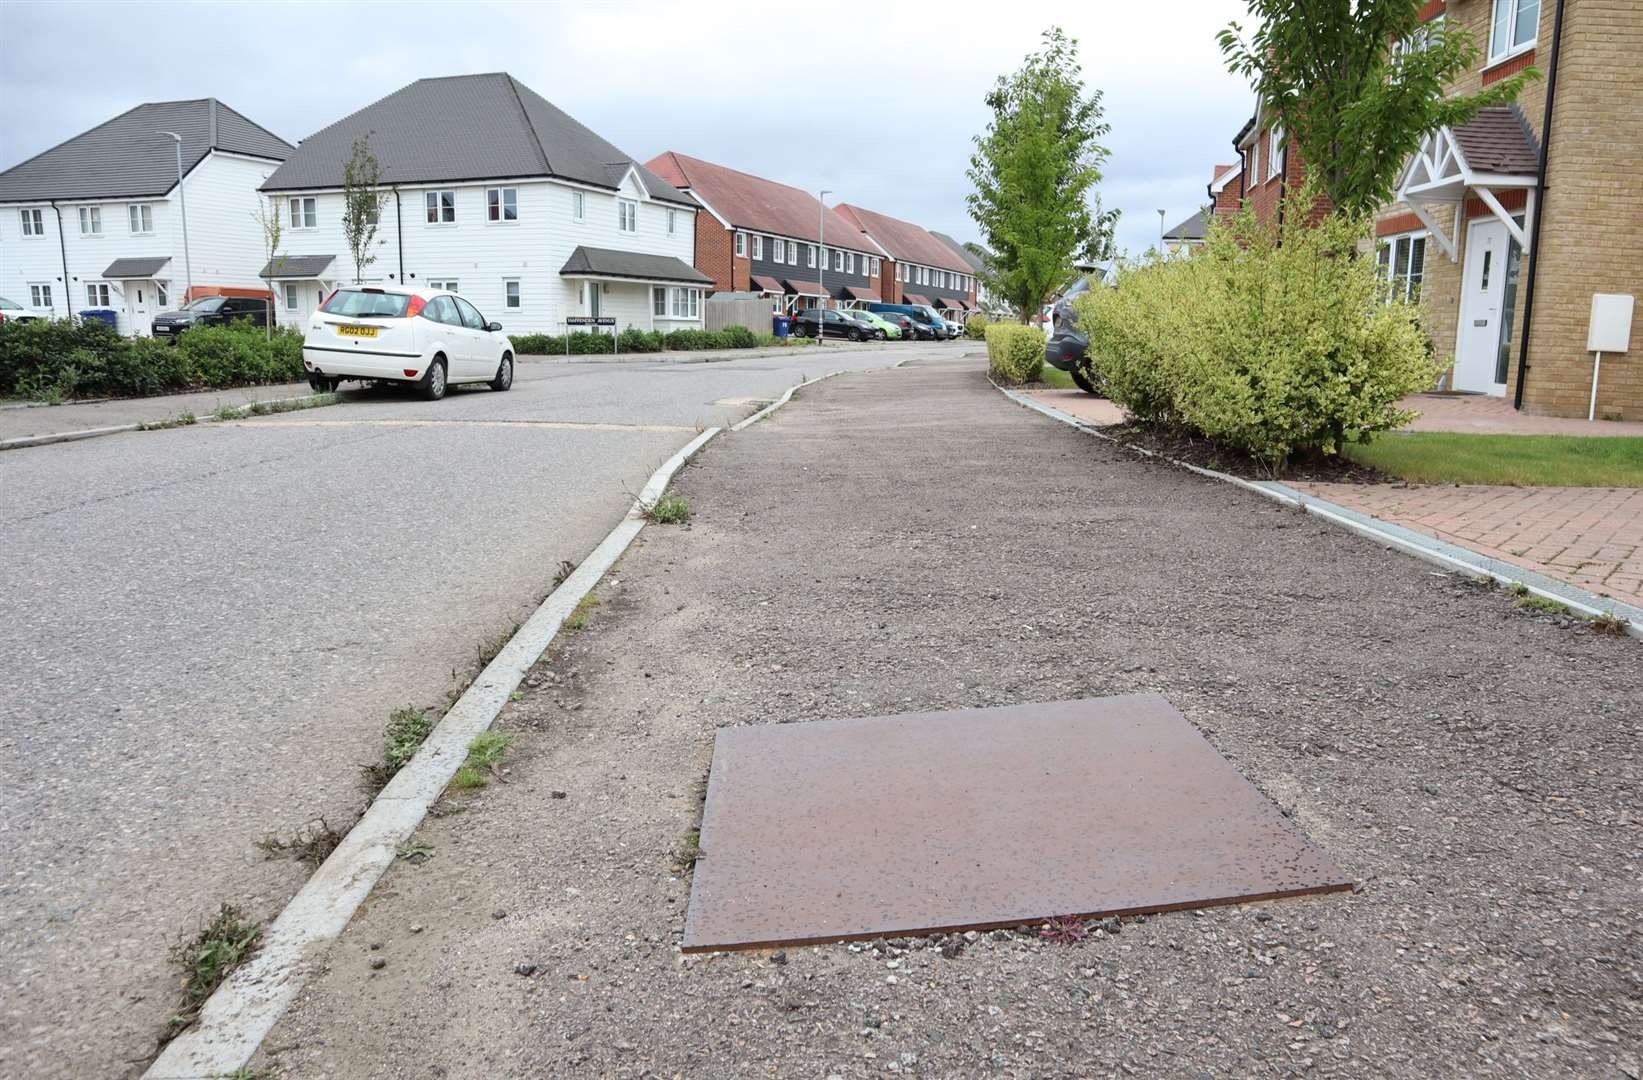 Unfinished pavement in Eveas Drive, Heron Fields, Great Easthall, Murston, Sittingbourne